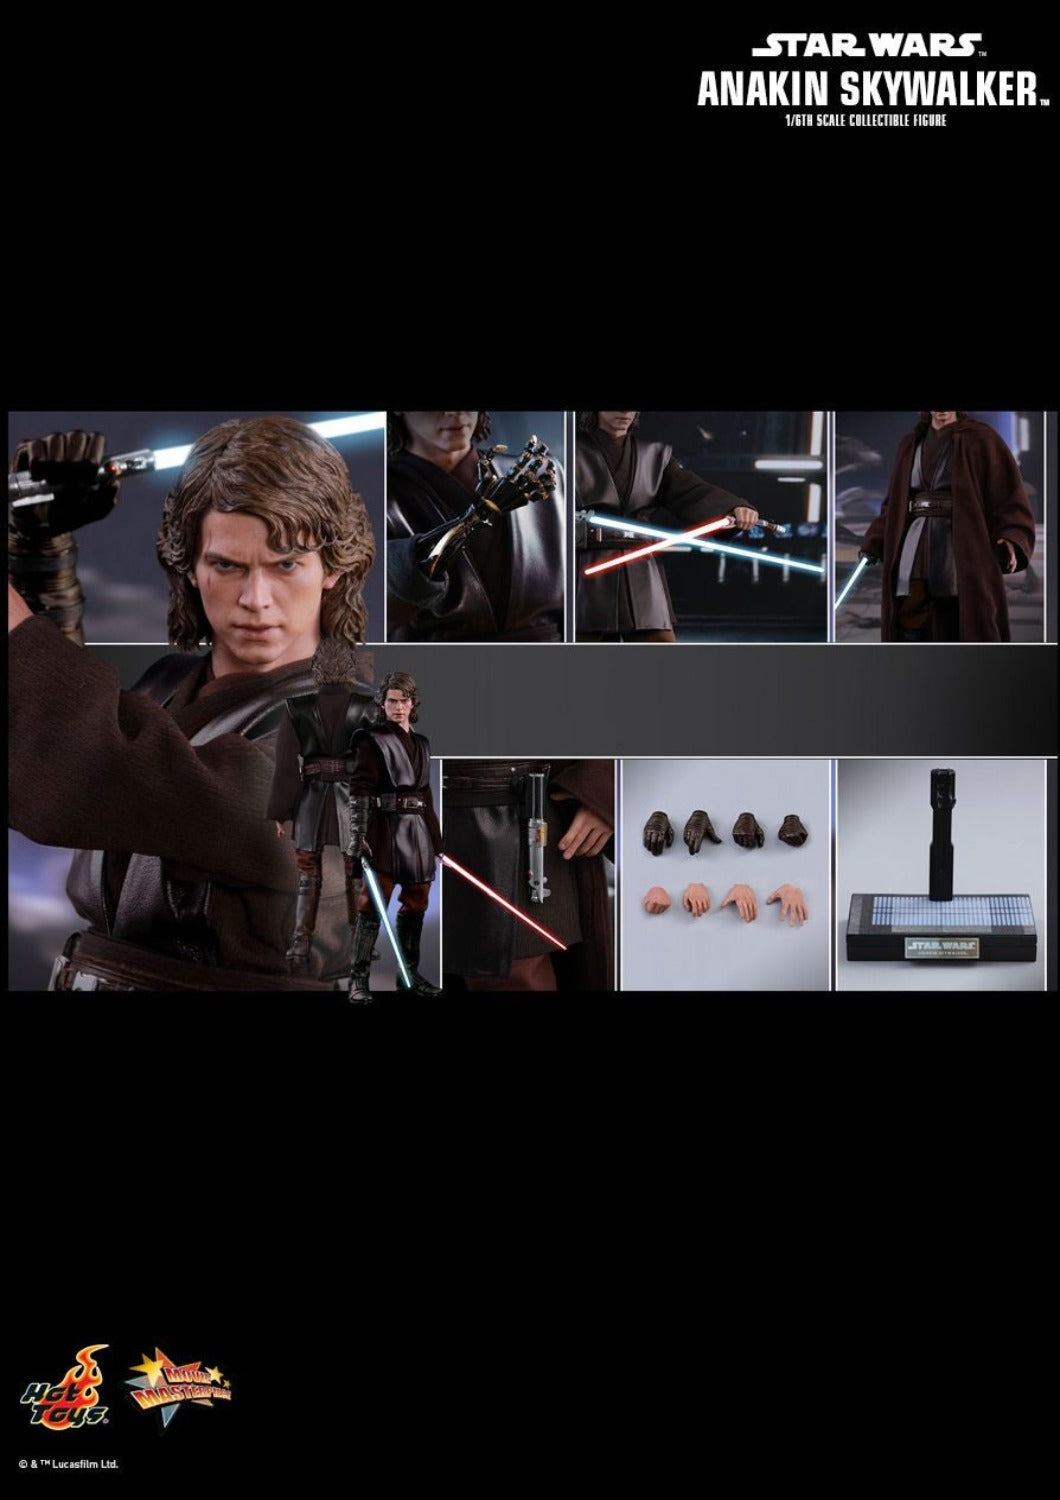 HOT TOYS STAR WARS EPISODE III: REVENGE OF THE SITH ANAKIN SKYWALKER 1/6TH SCALE COLLECTIBLE FIGURE - MMS437 - Anotoys Collectibles